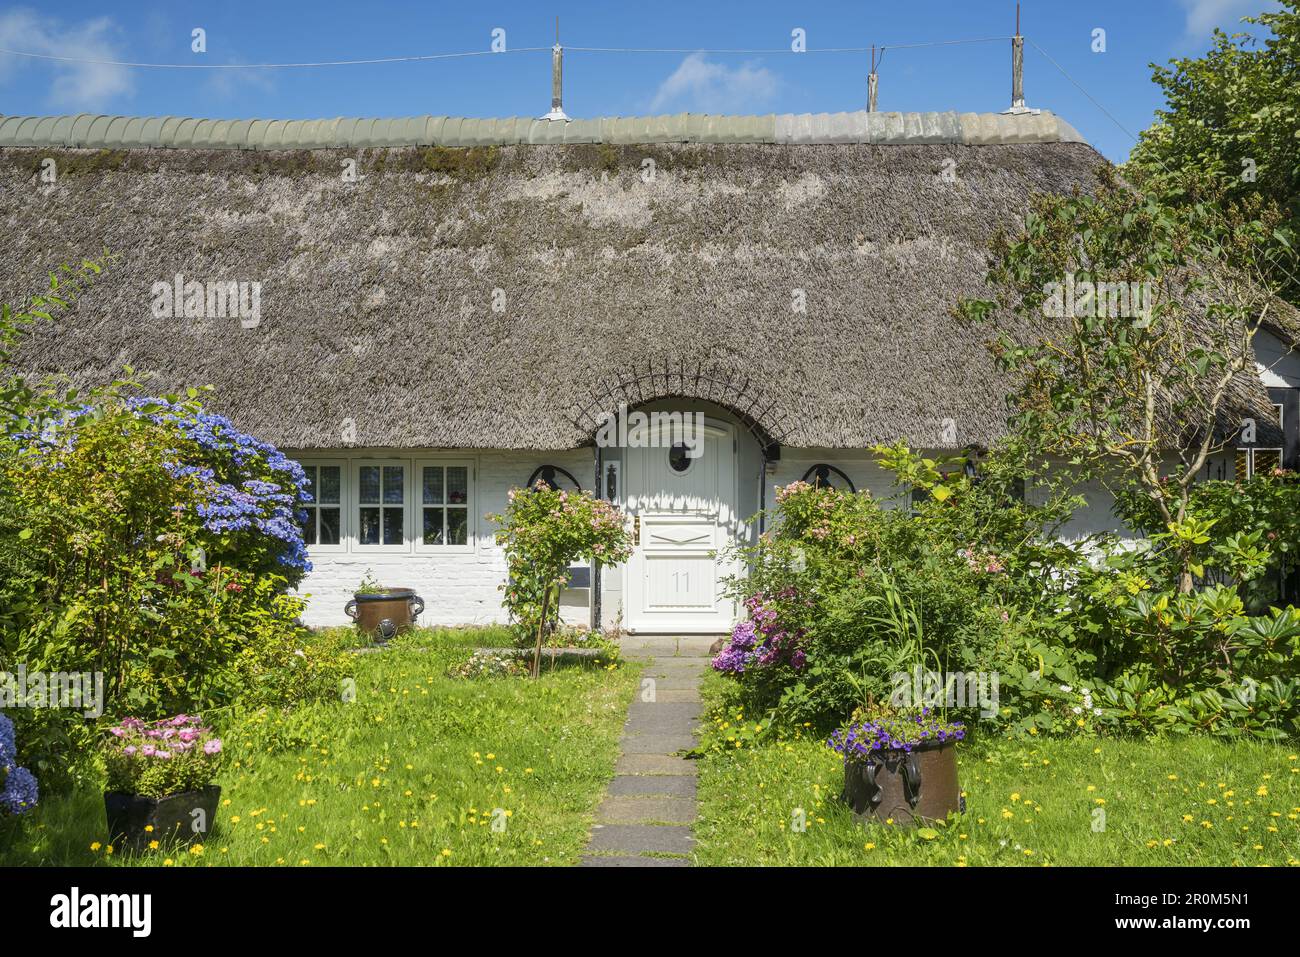 Thatched house in Westerland, North Frisian Island Sylt, North Sea coast, Schleswig-Holstein, Northern Germany, Germany, Europe Stock Photo